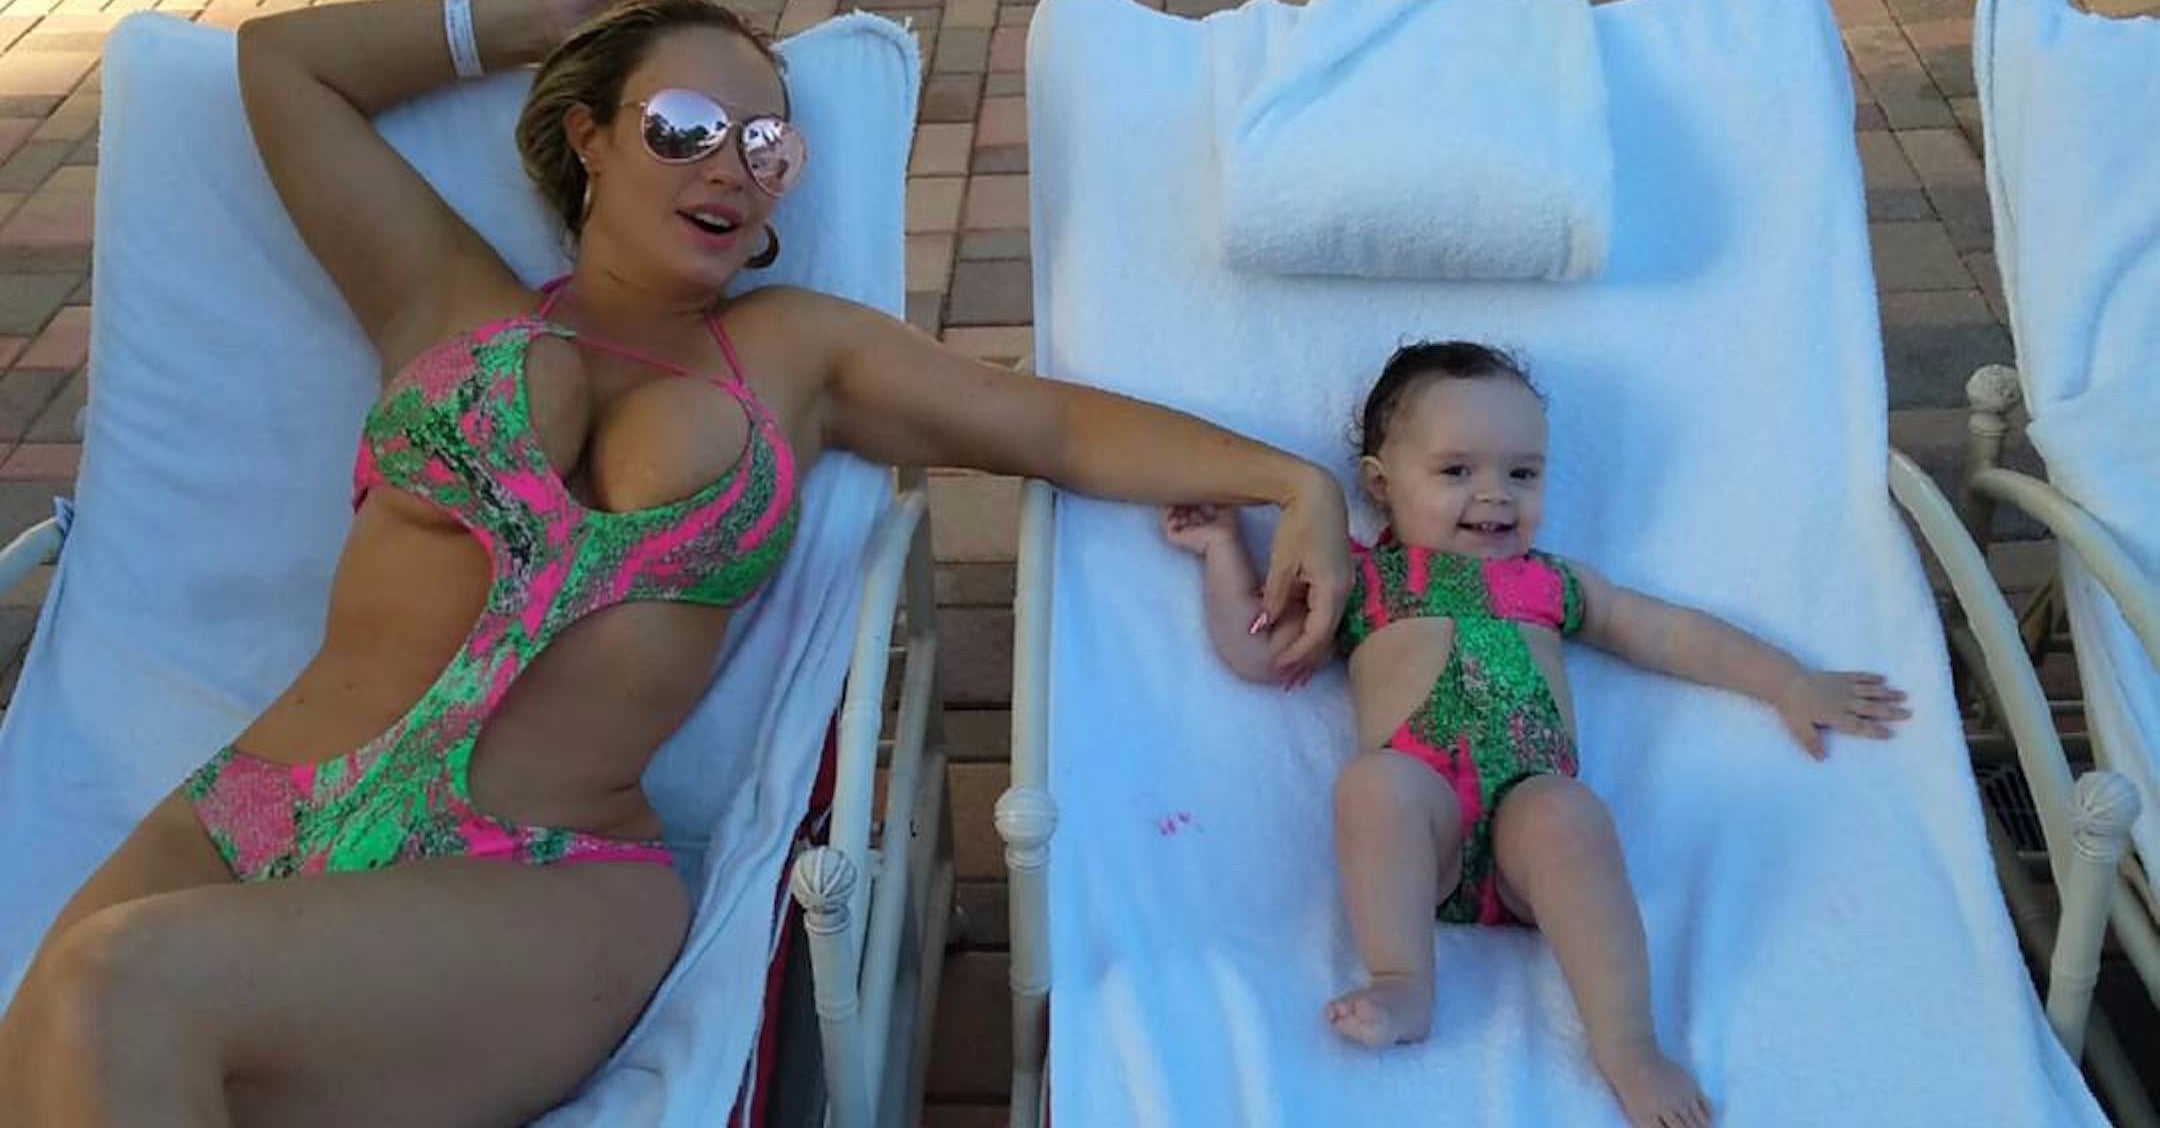 Coco Austin Bikini Pictures With Baby Chanel